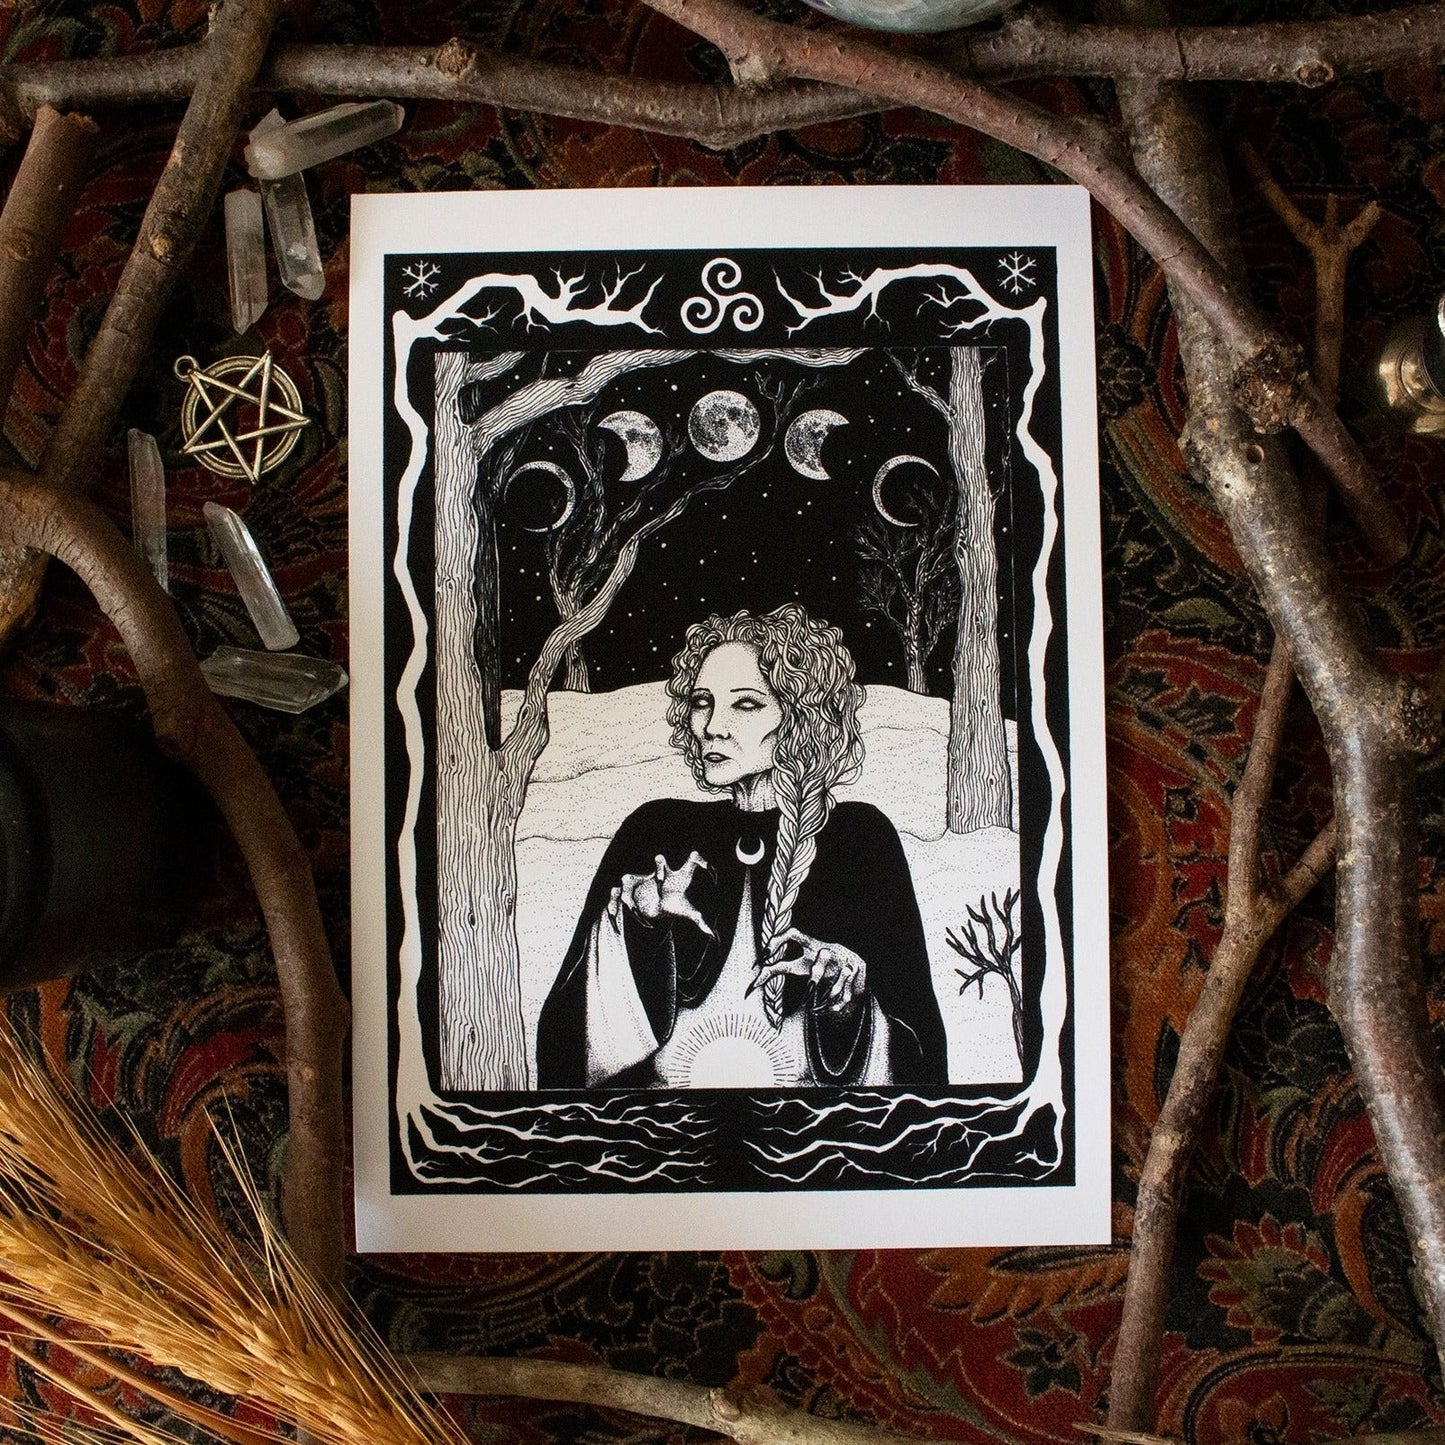 An image of a crone casting a spell with the phases of the moon spread across behind her 